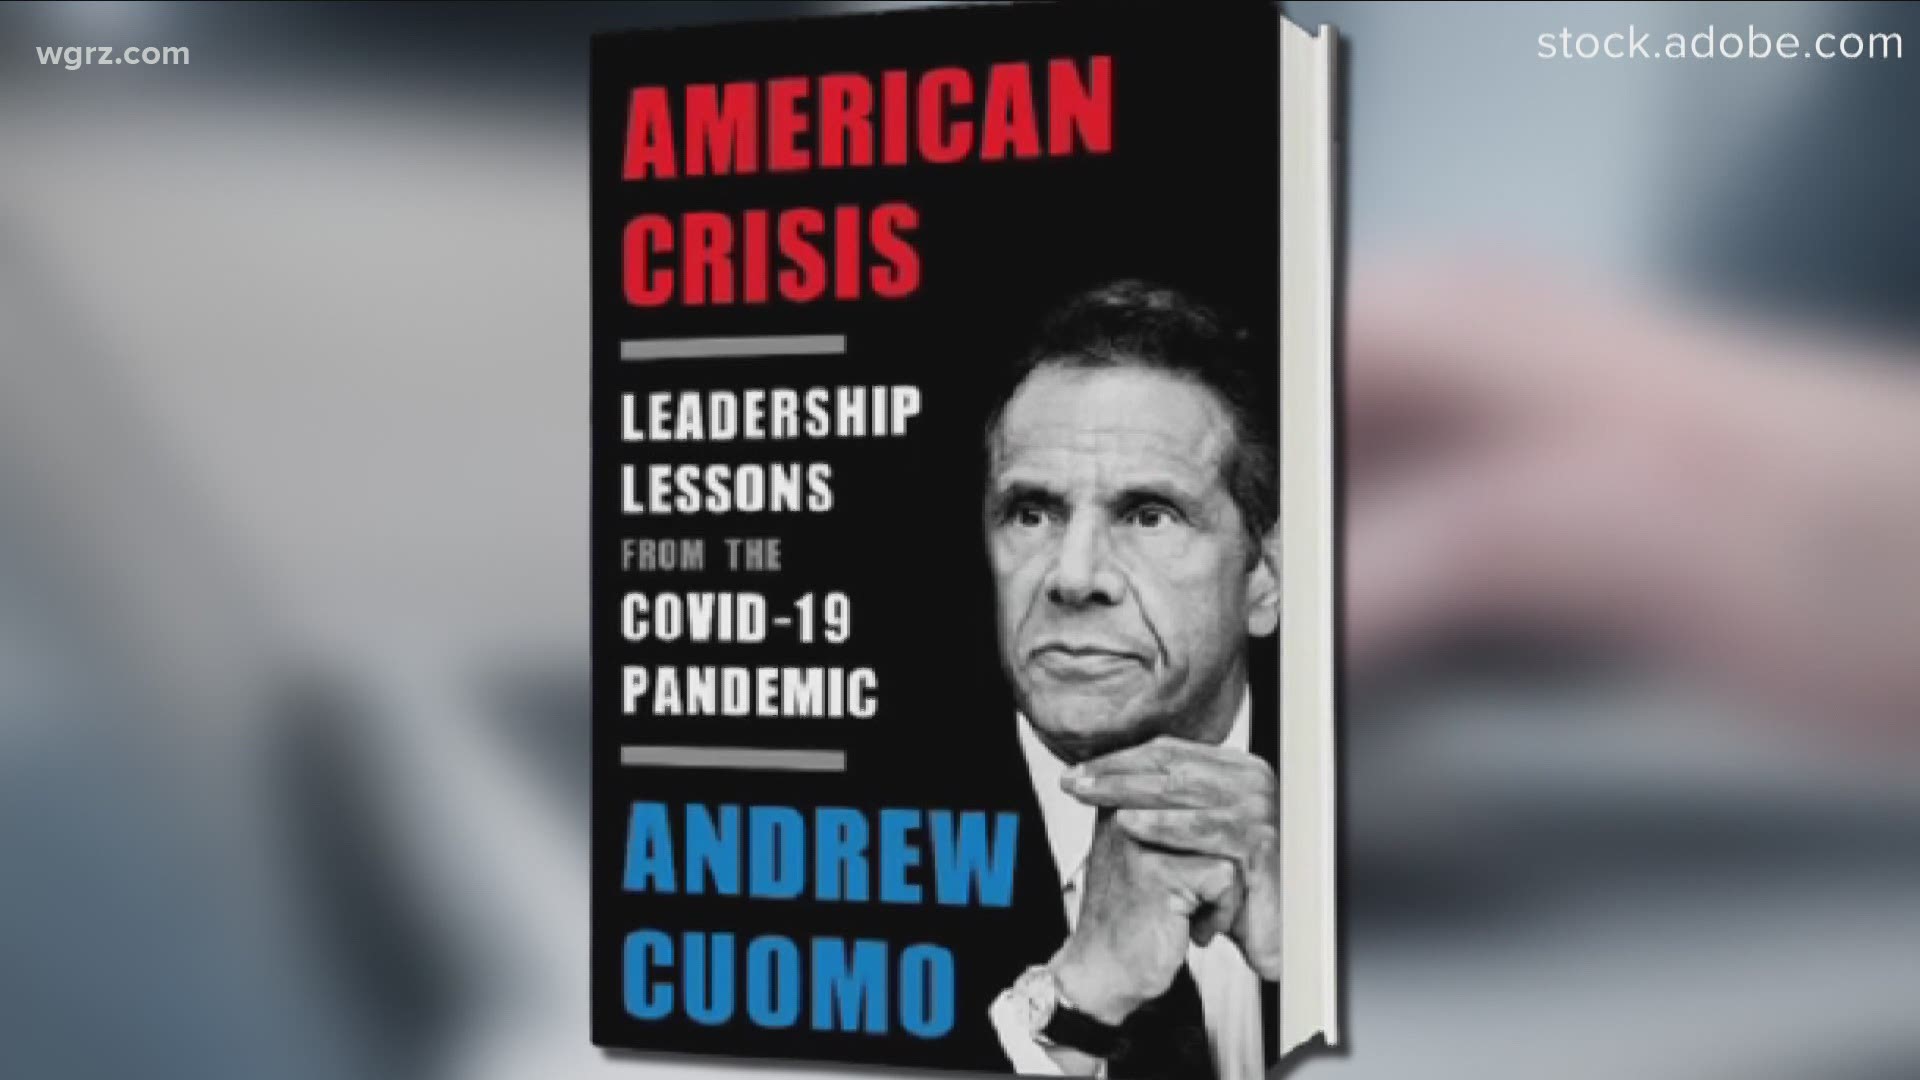 state attorney general is investigating accusations that he had taxpayer-funded employees work on that book on COVID leadership on their official time